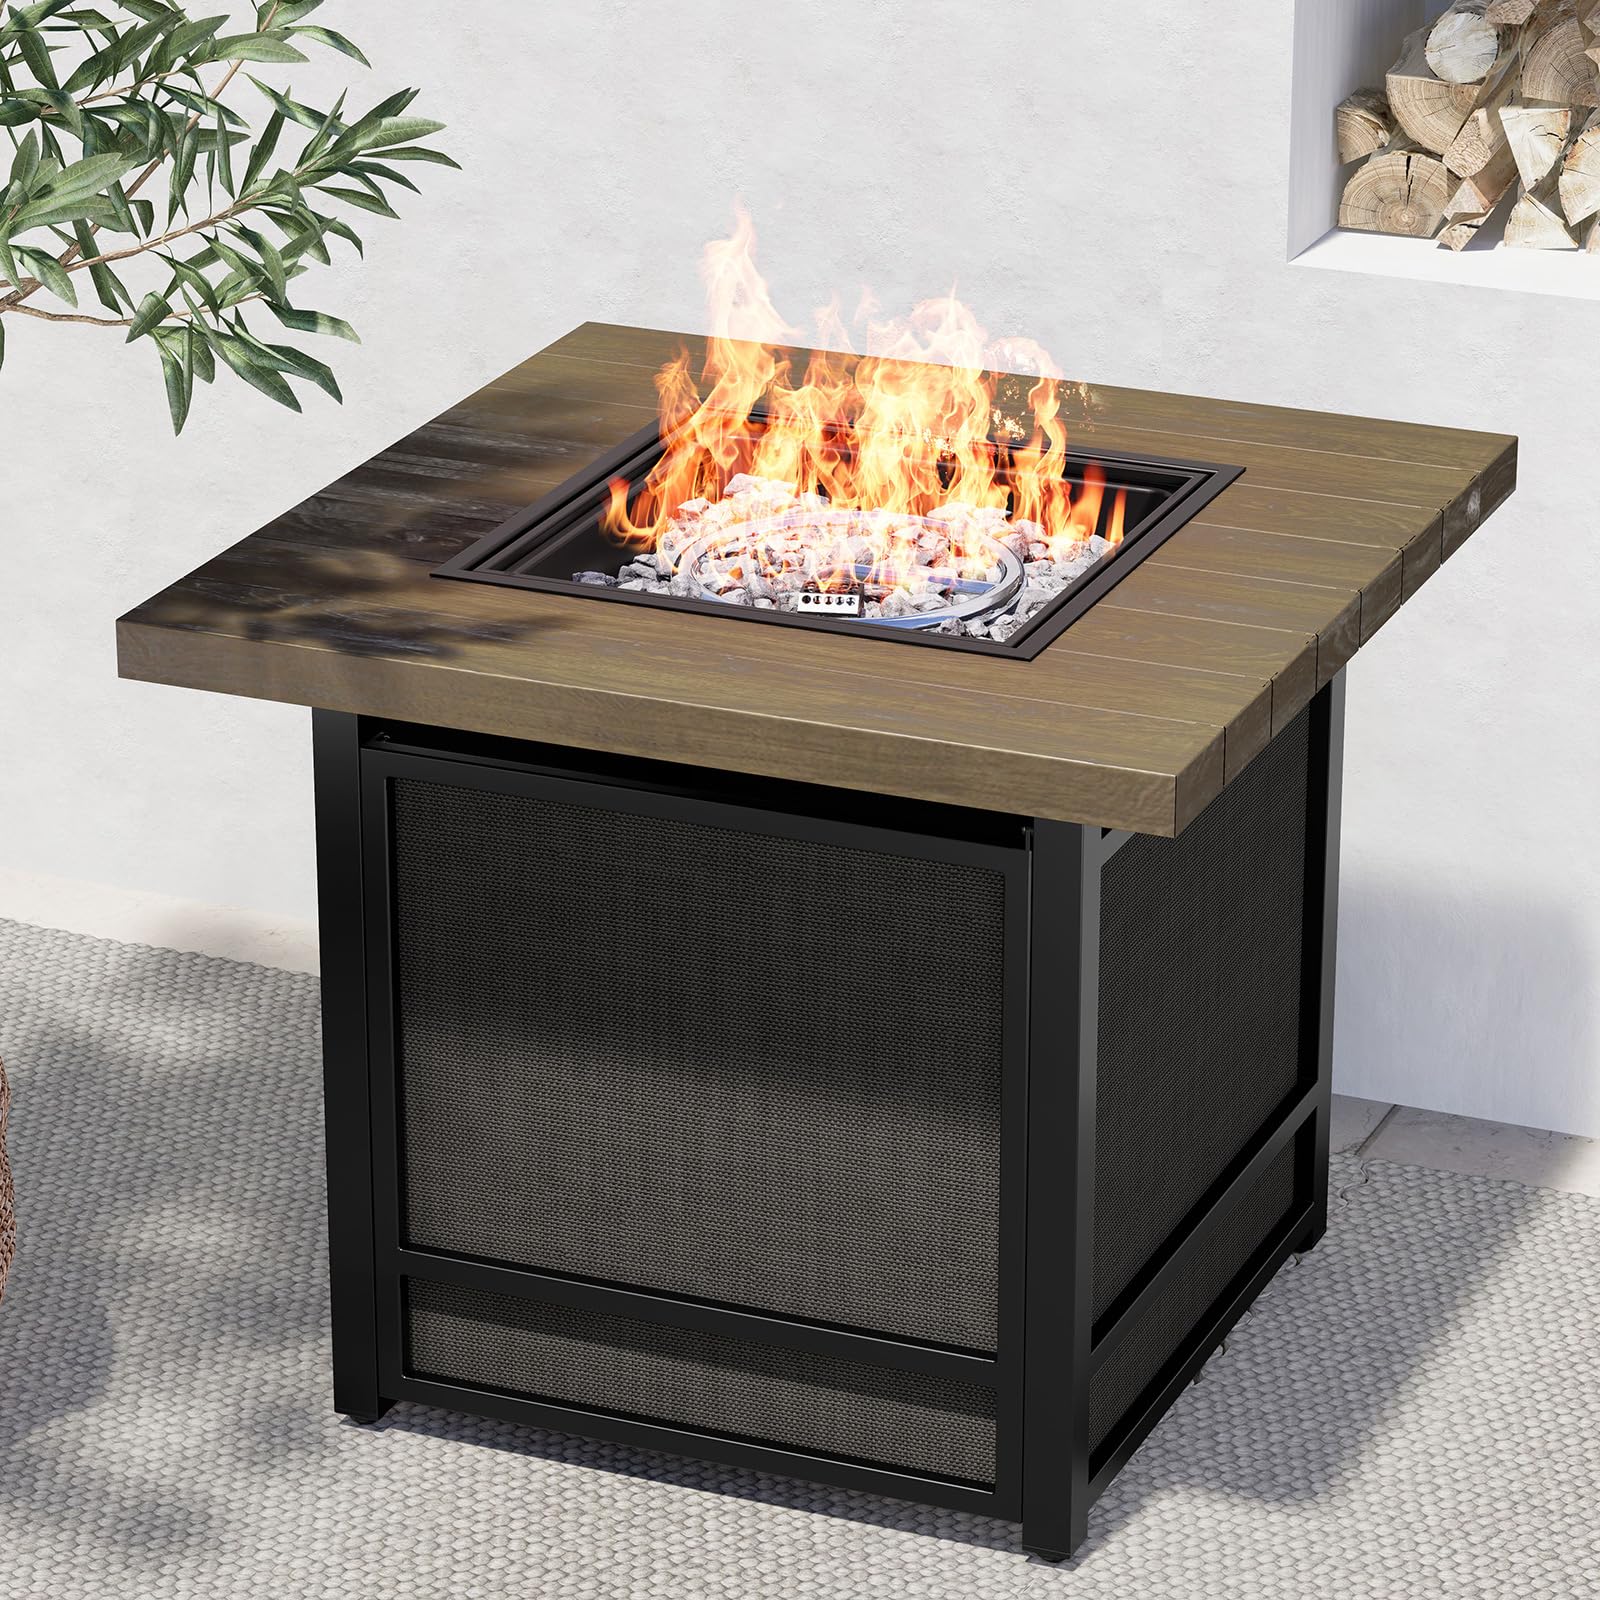 29 Inch Propane fire Pit,Outdoor fire Pit All-Weather Wood Grain Square Stainless Steel smokeless firepit Table with Sling Base